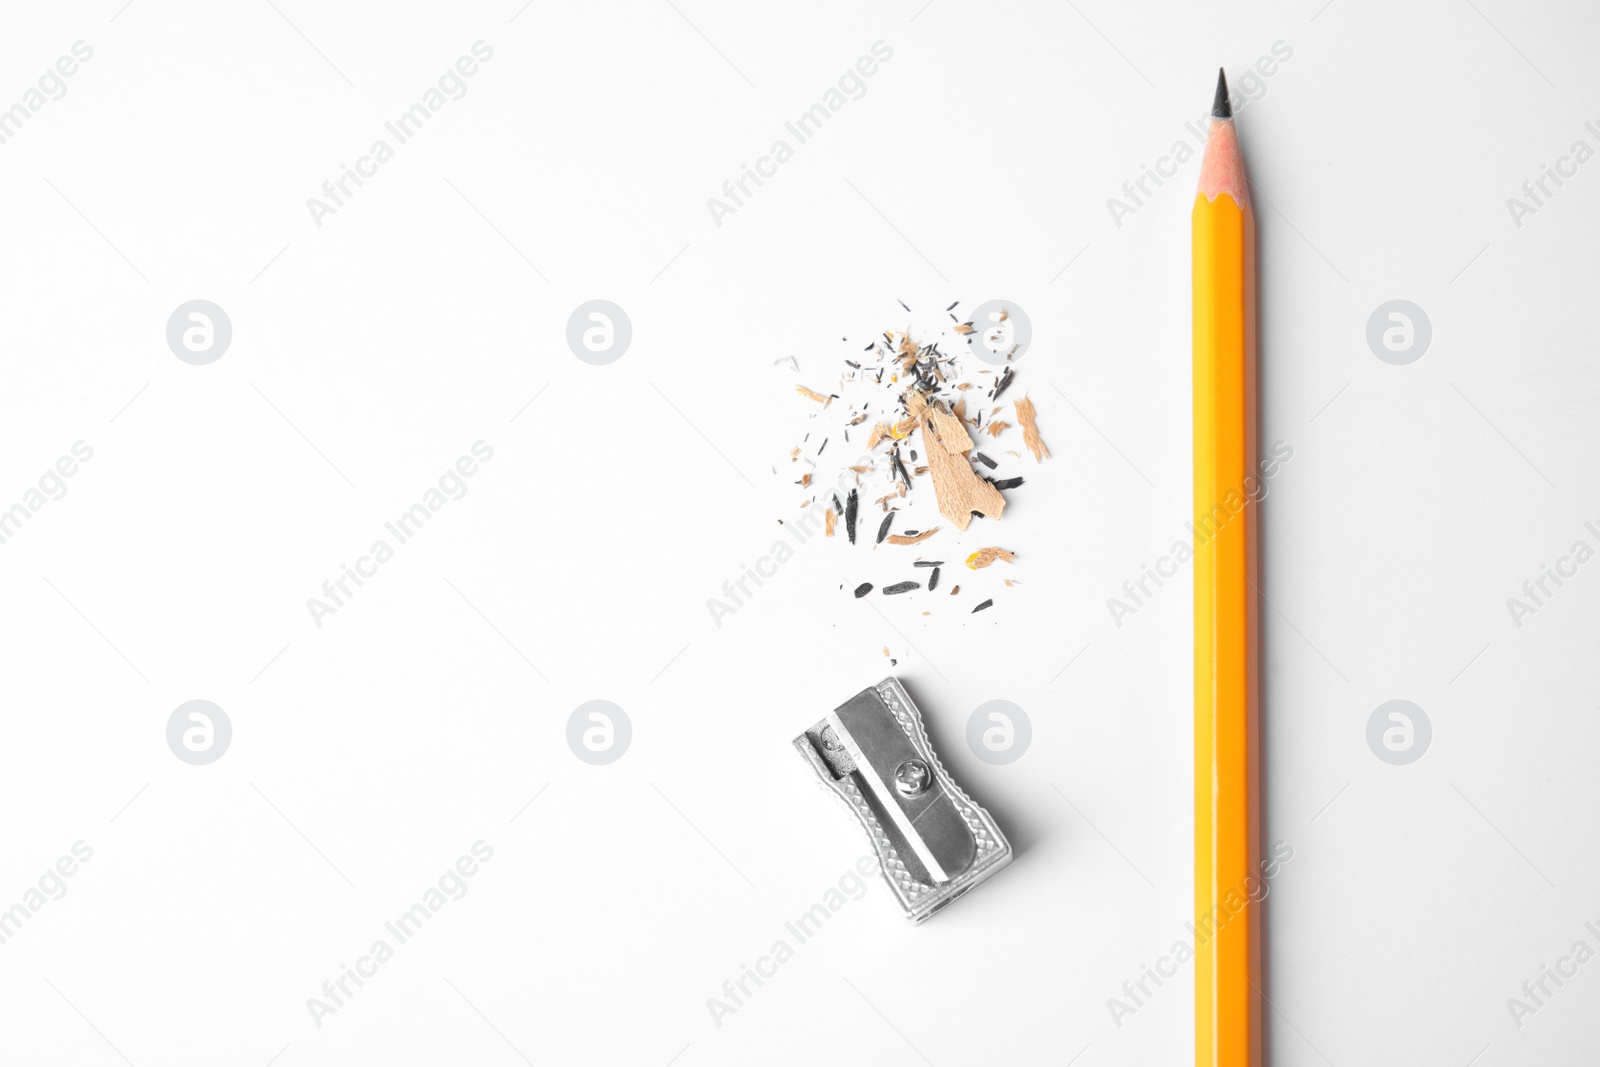 Photo of Pencil, sharpener and shavings on white background, top view